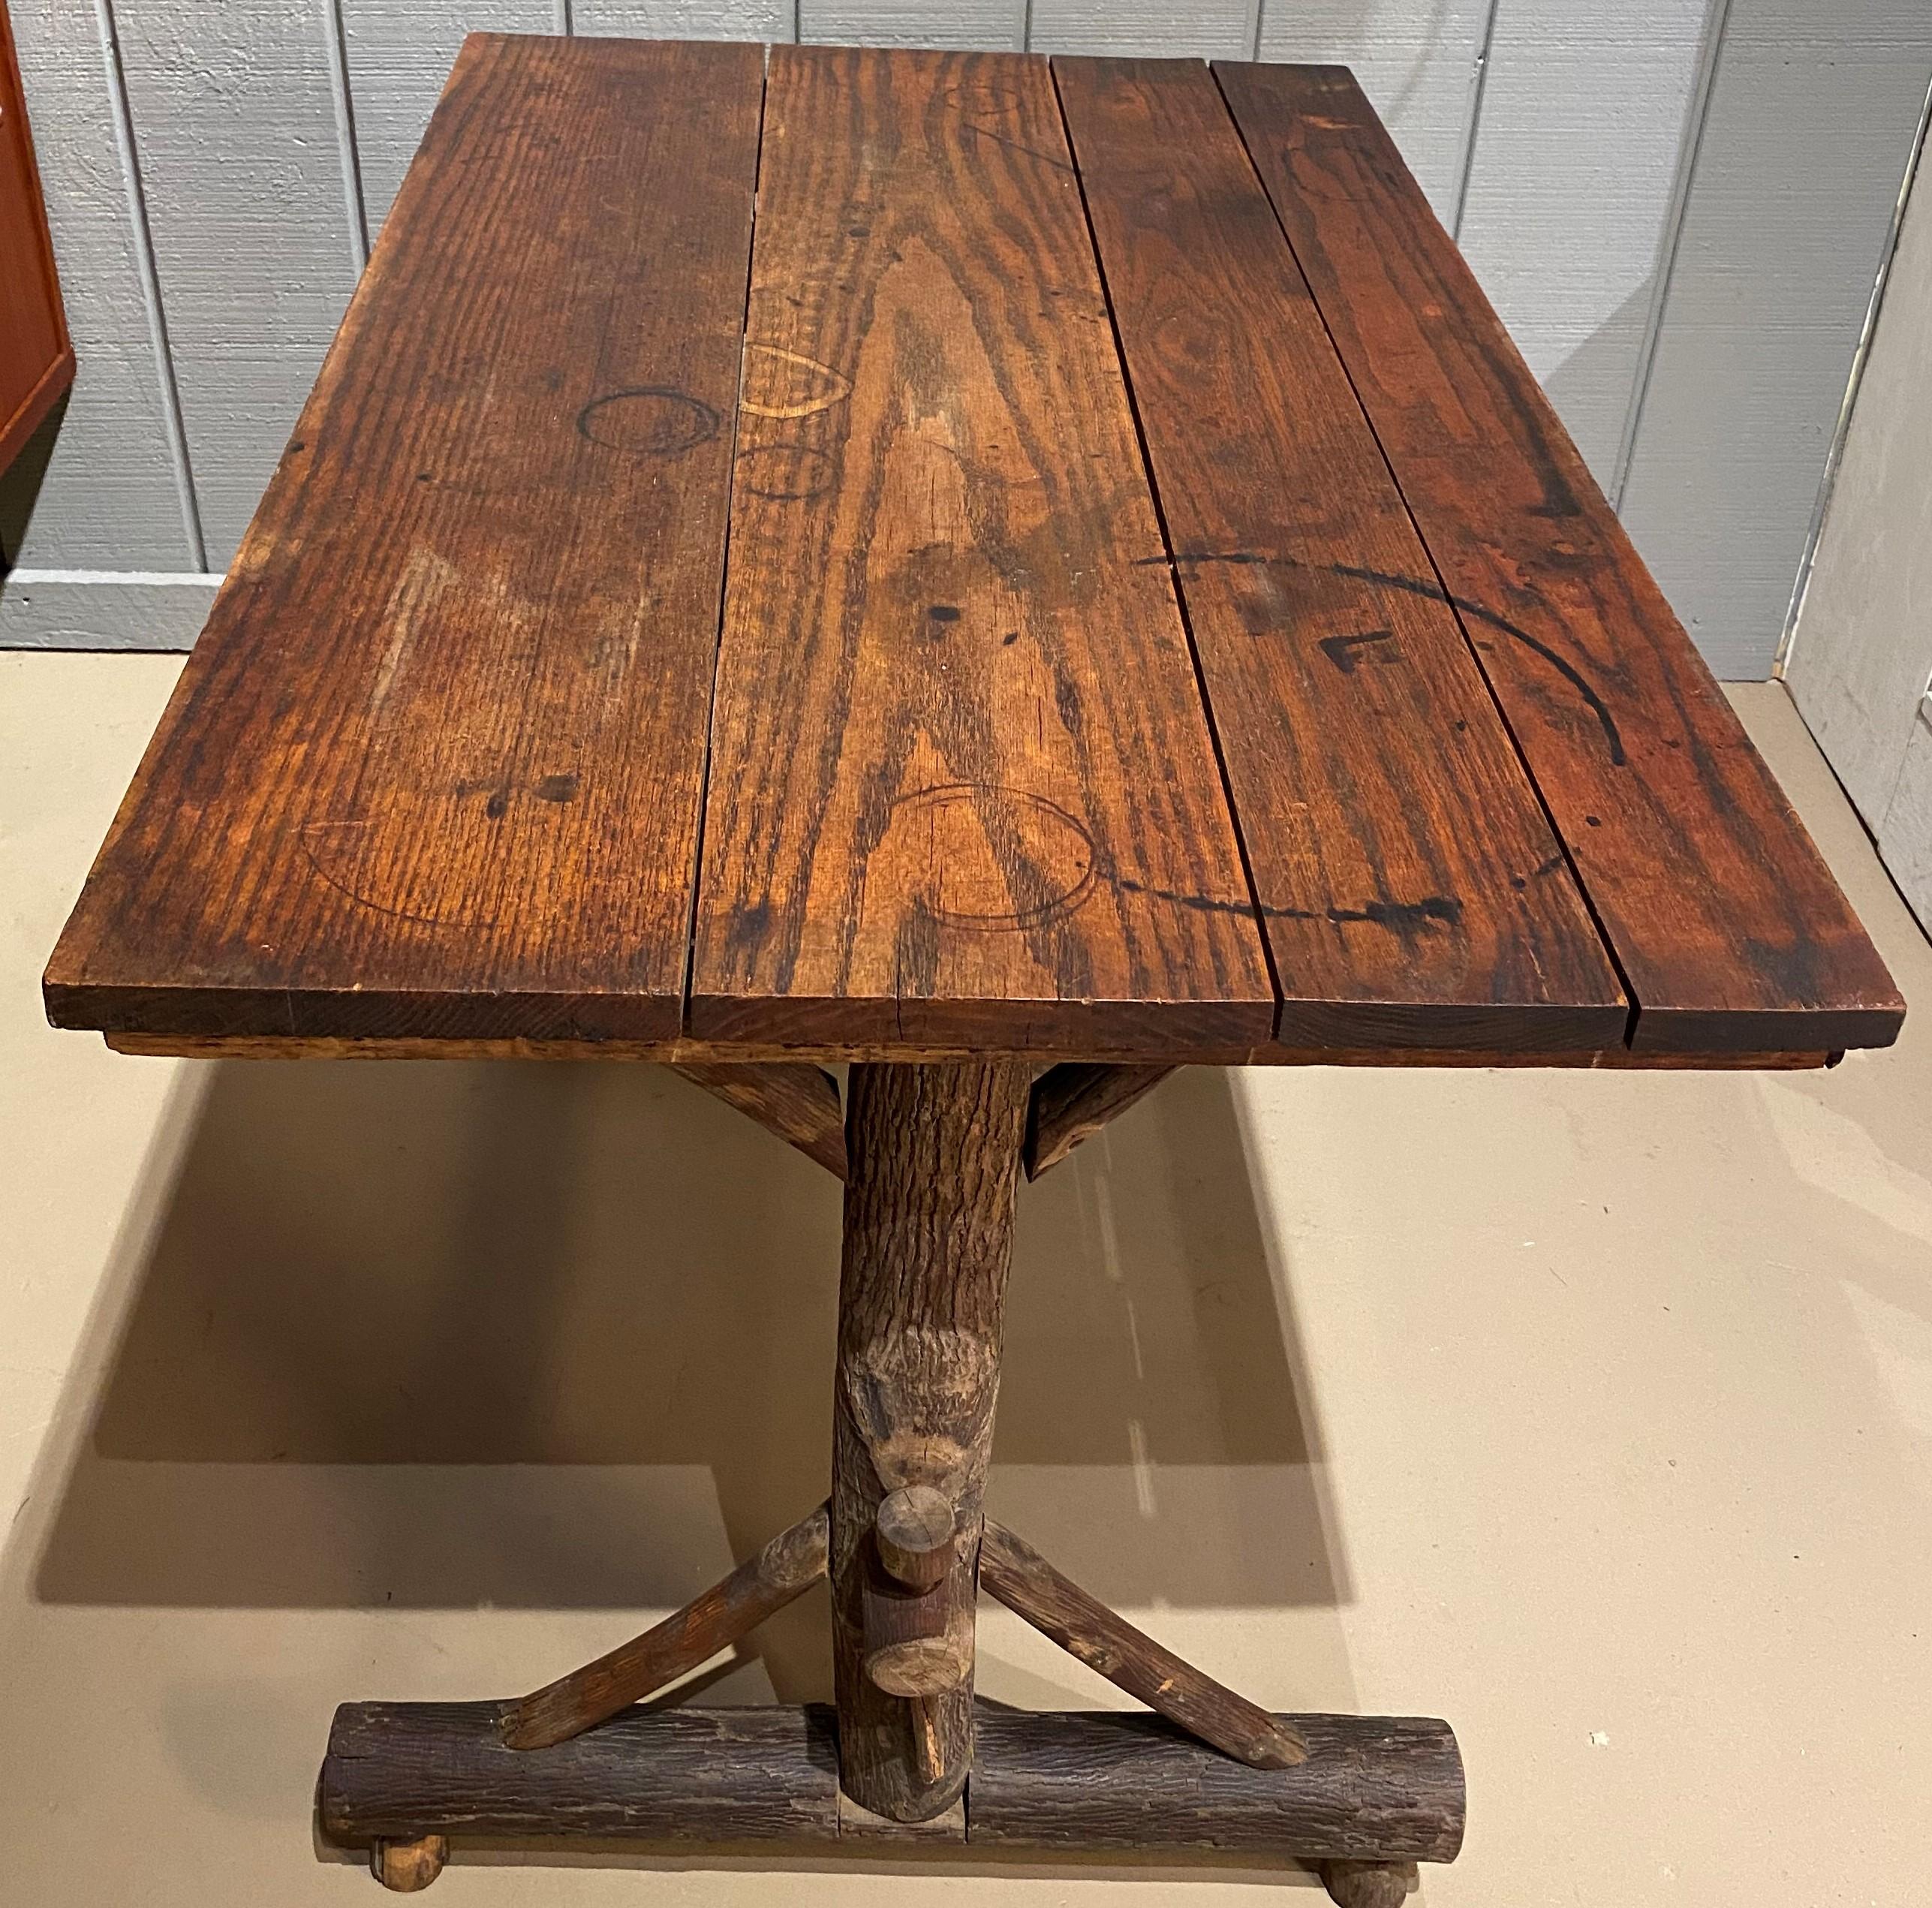 Old Hickory Rustic Davenport Form Table with Two Matching Chairs, circa 1940s 1